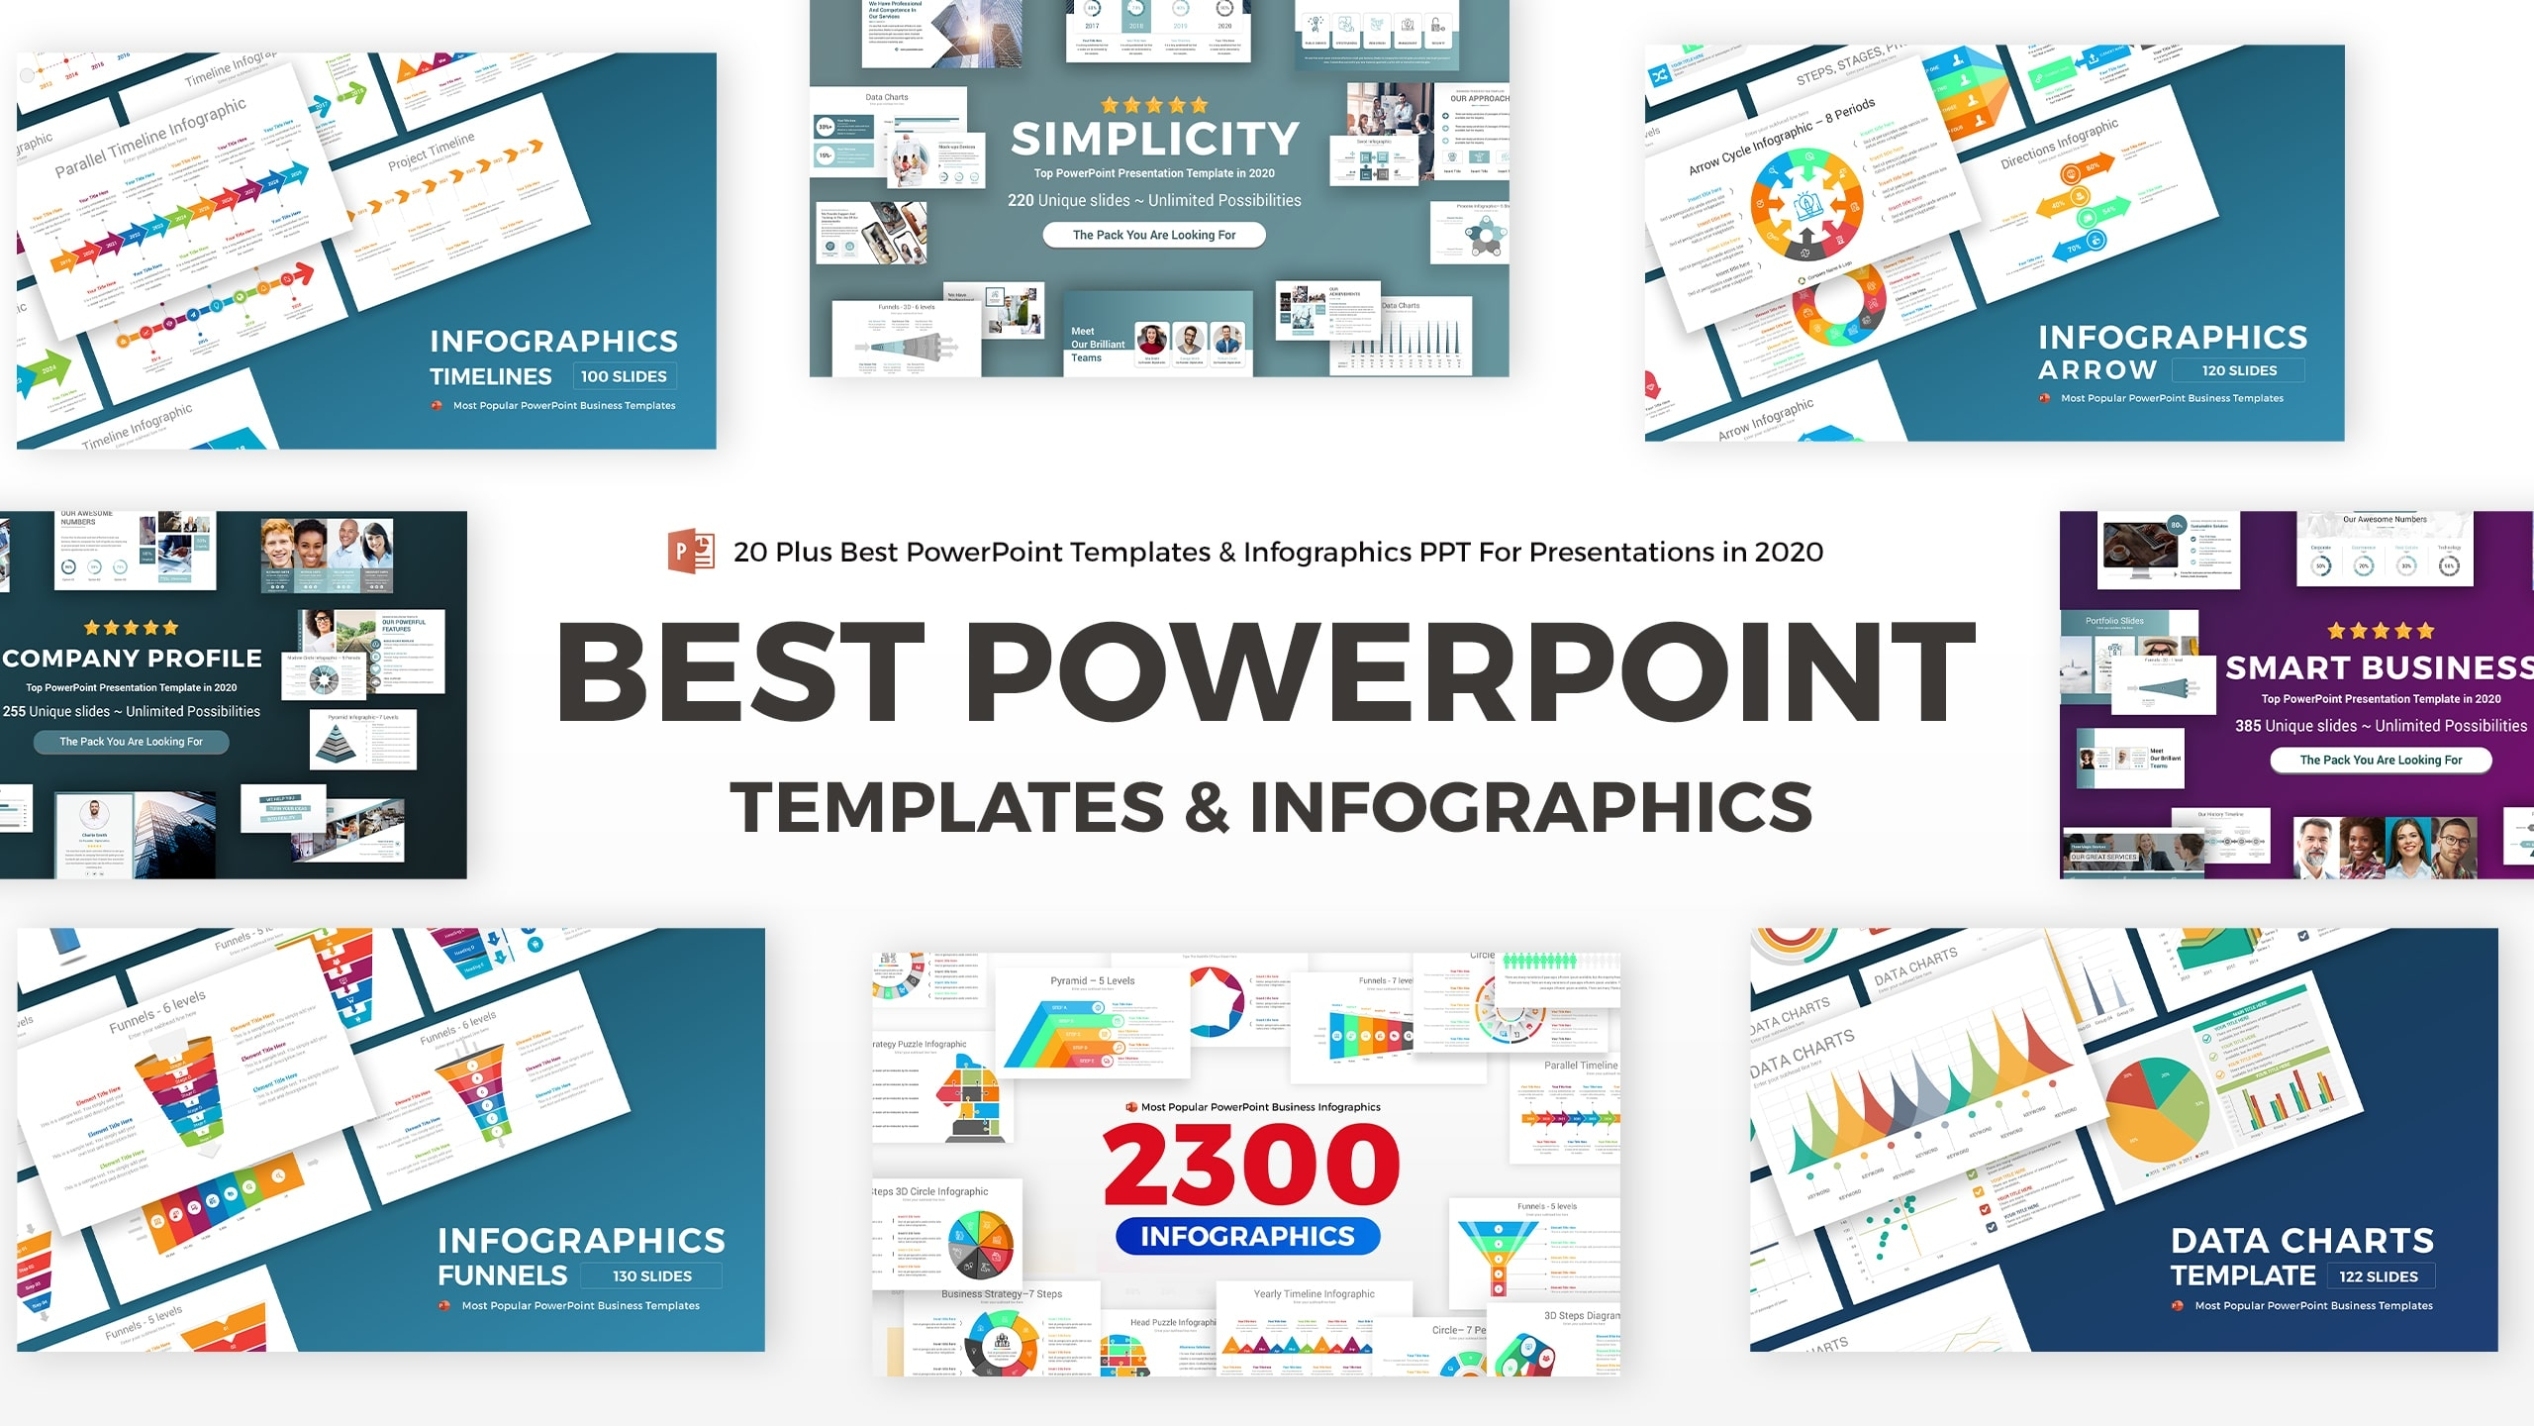 Powerpoint Slides Design Templates For Free